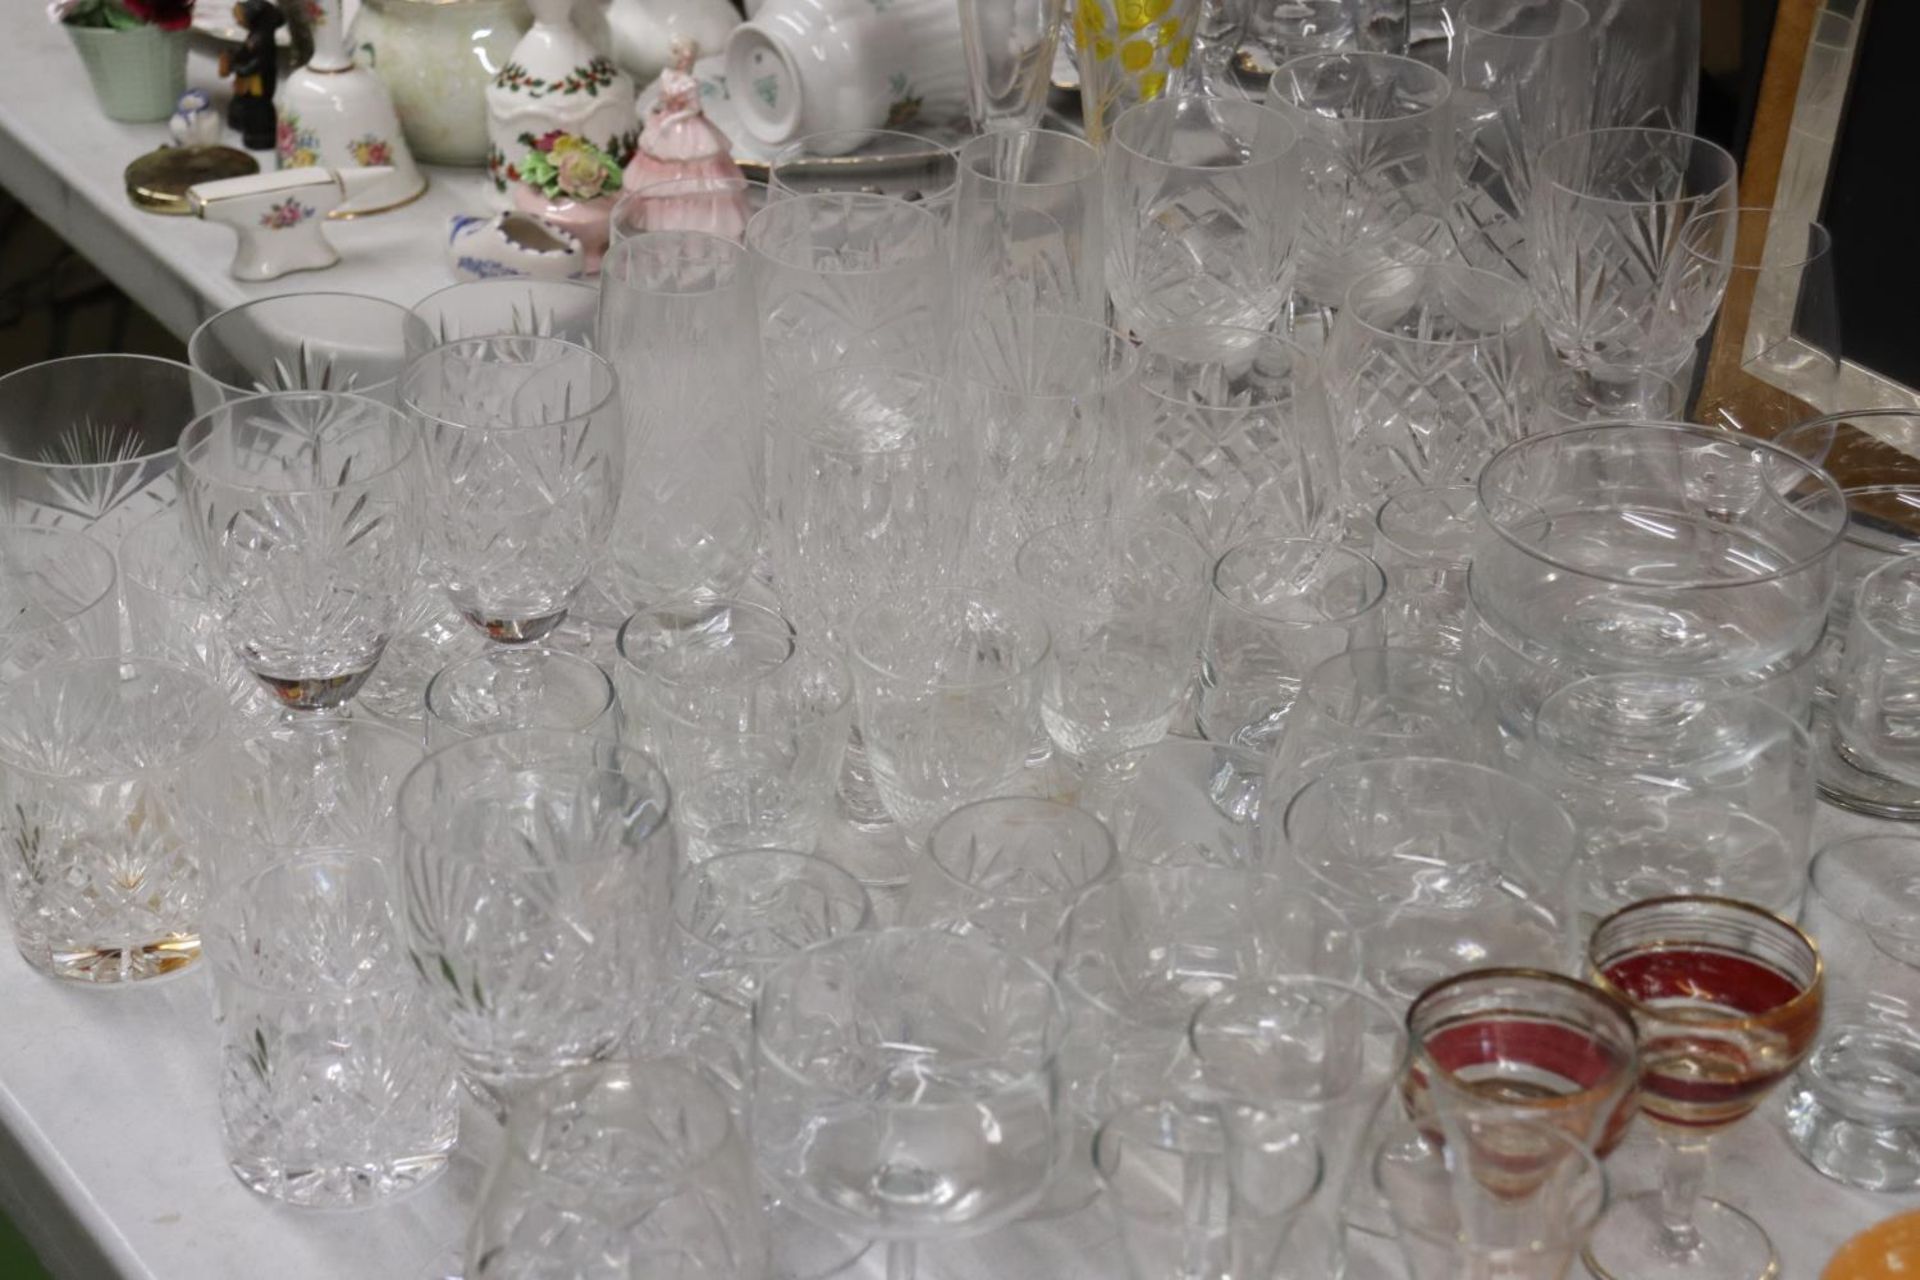 A LARGE QUANTITY OF GLASSES TO INCLUDE CHAMPAGNE FLUTES, WINE, SHERRY, TUMBLERS, DESSERT BOWLS, ETC - Image 6 of 6